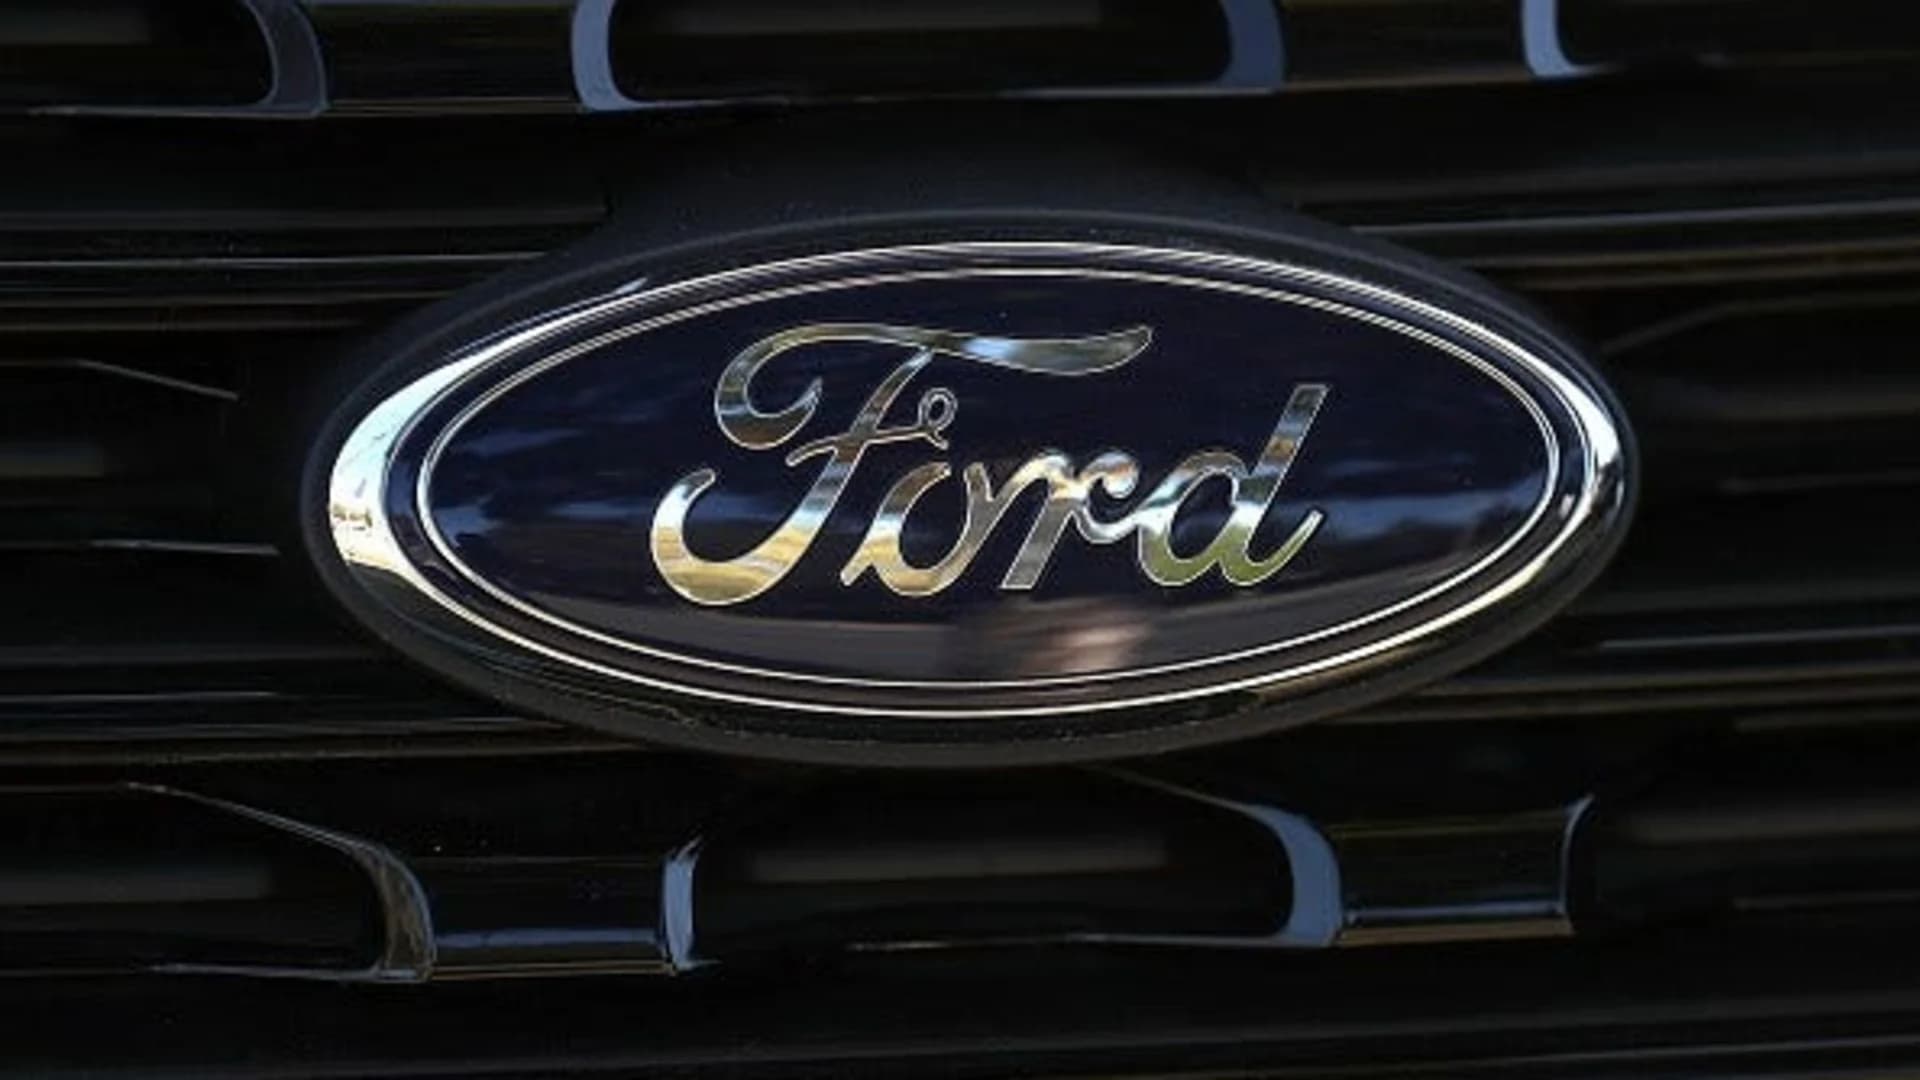 Ford recalls 550K vehicles that can roll away unexpectedly